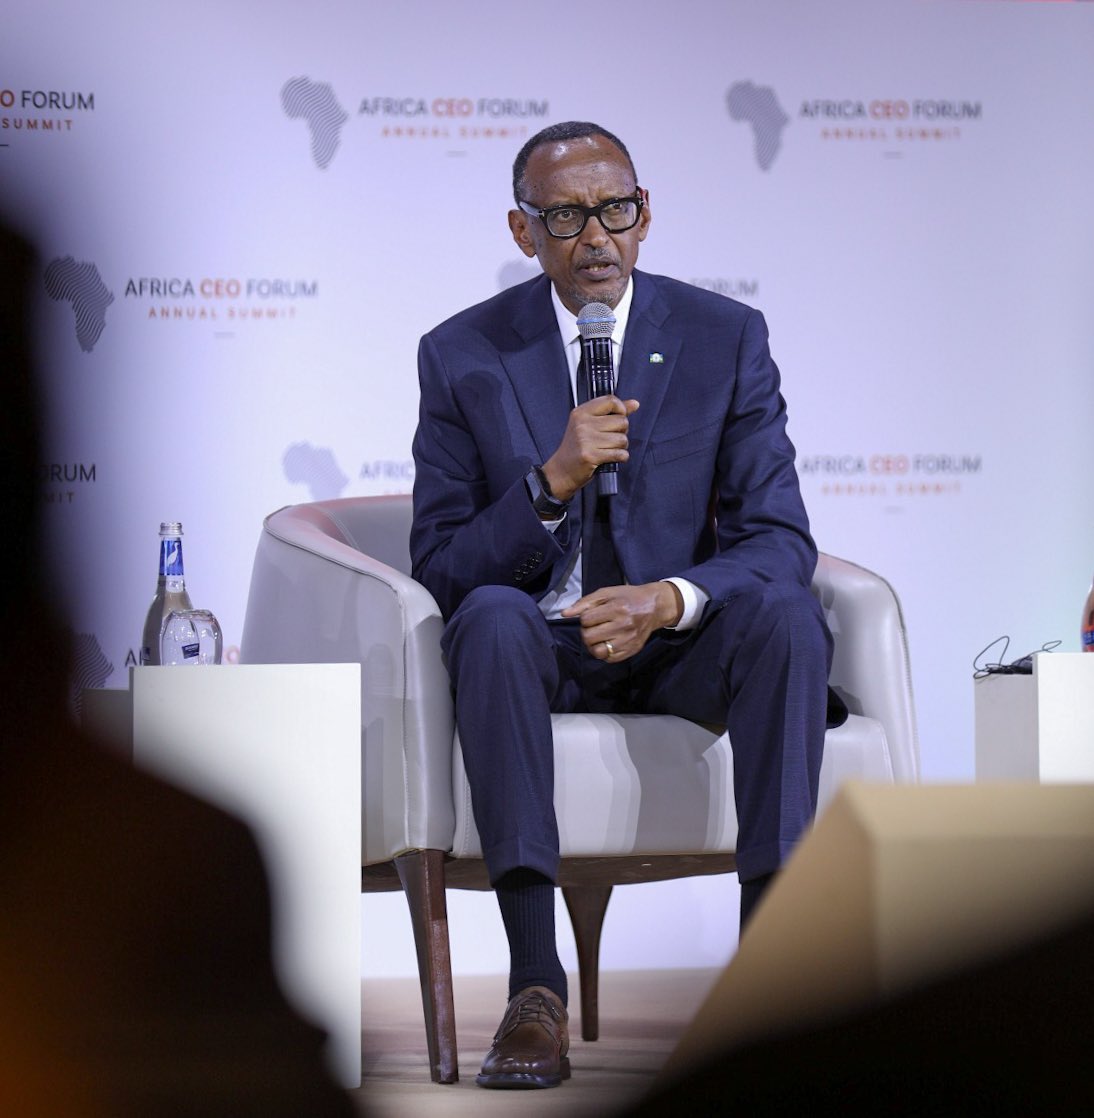 President Kagame at #ACF2024: We have to be practical and realistic. We have to work with the resources that we have. “Governments should be able to create business friendly policies, and businesses should also work to maximize that. It is doable.”